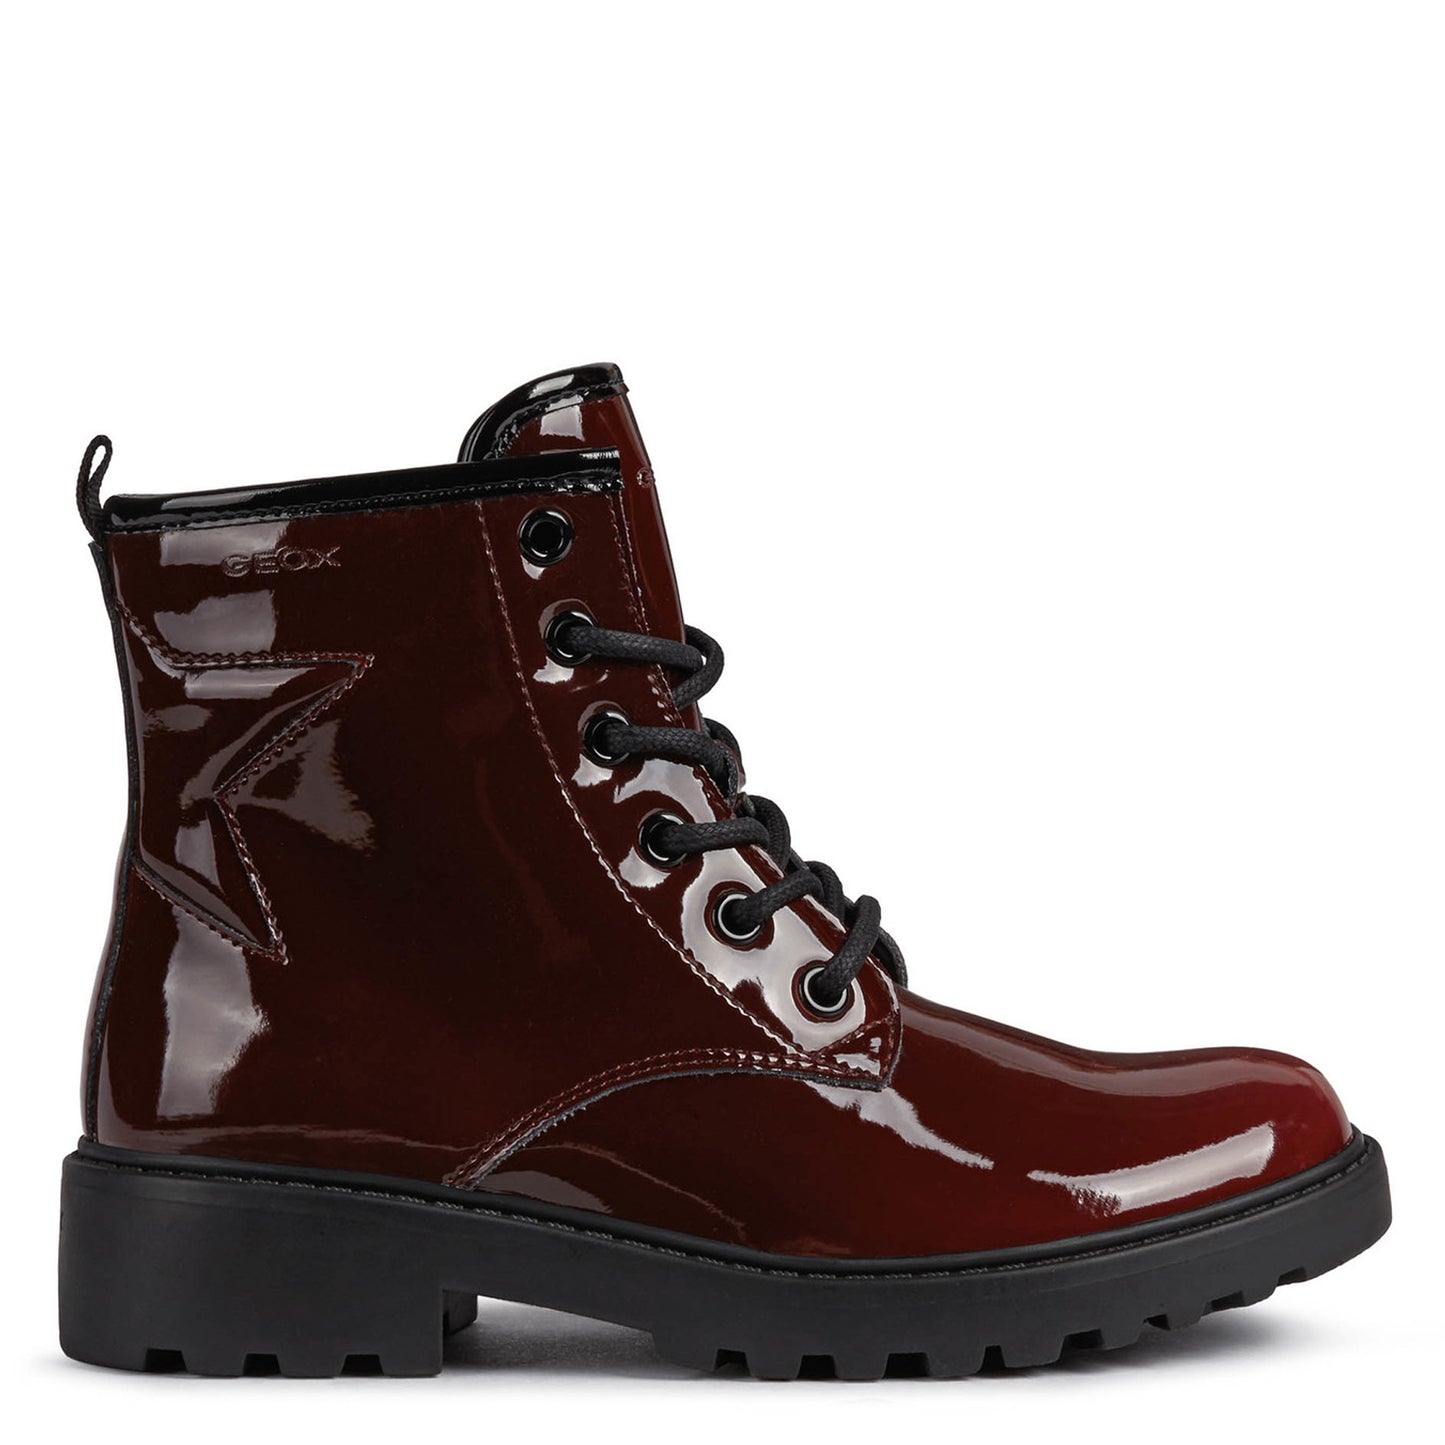 Casey Zipped Lace Up Boot in Bordeaux Patent